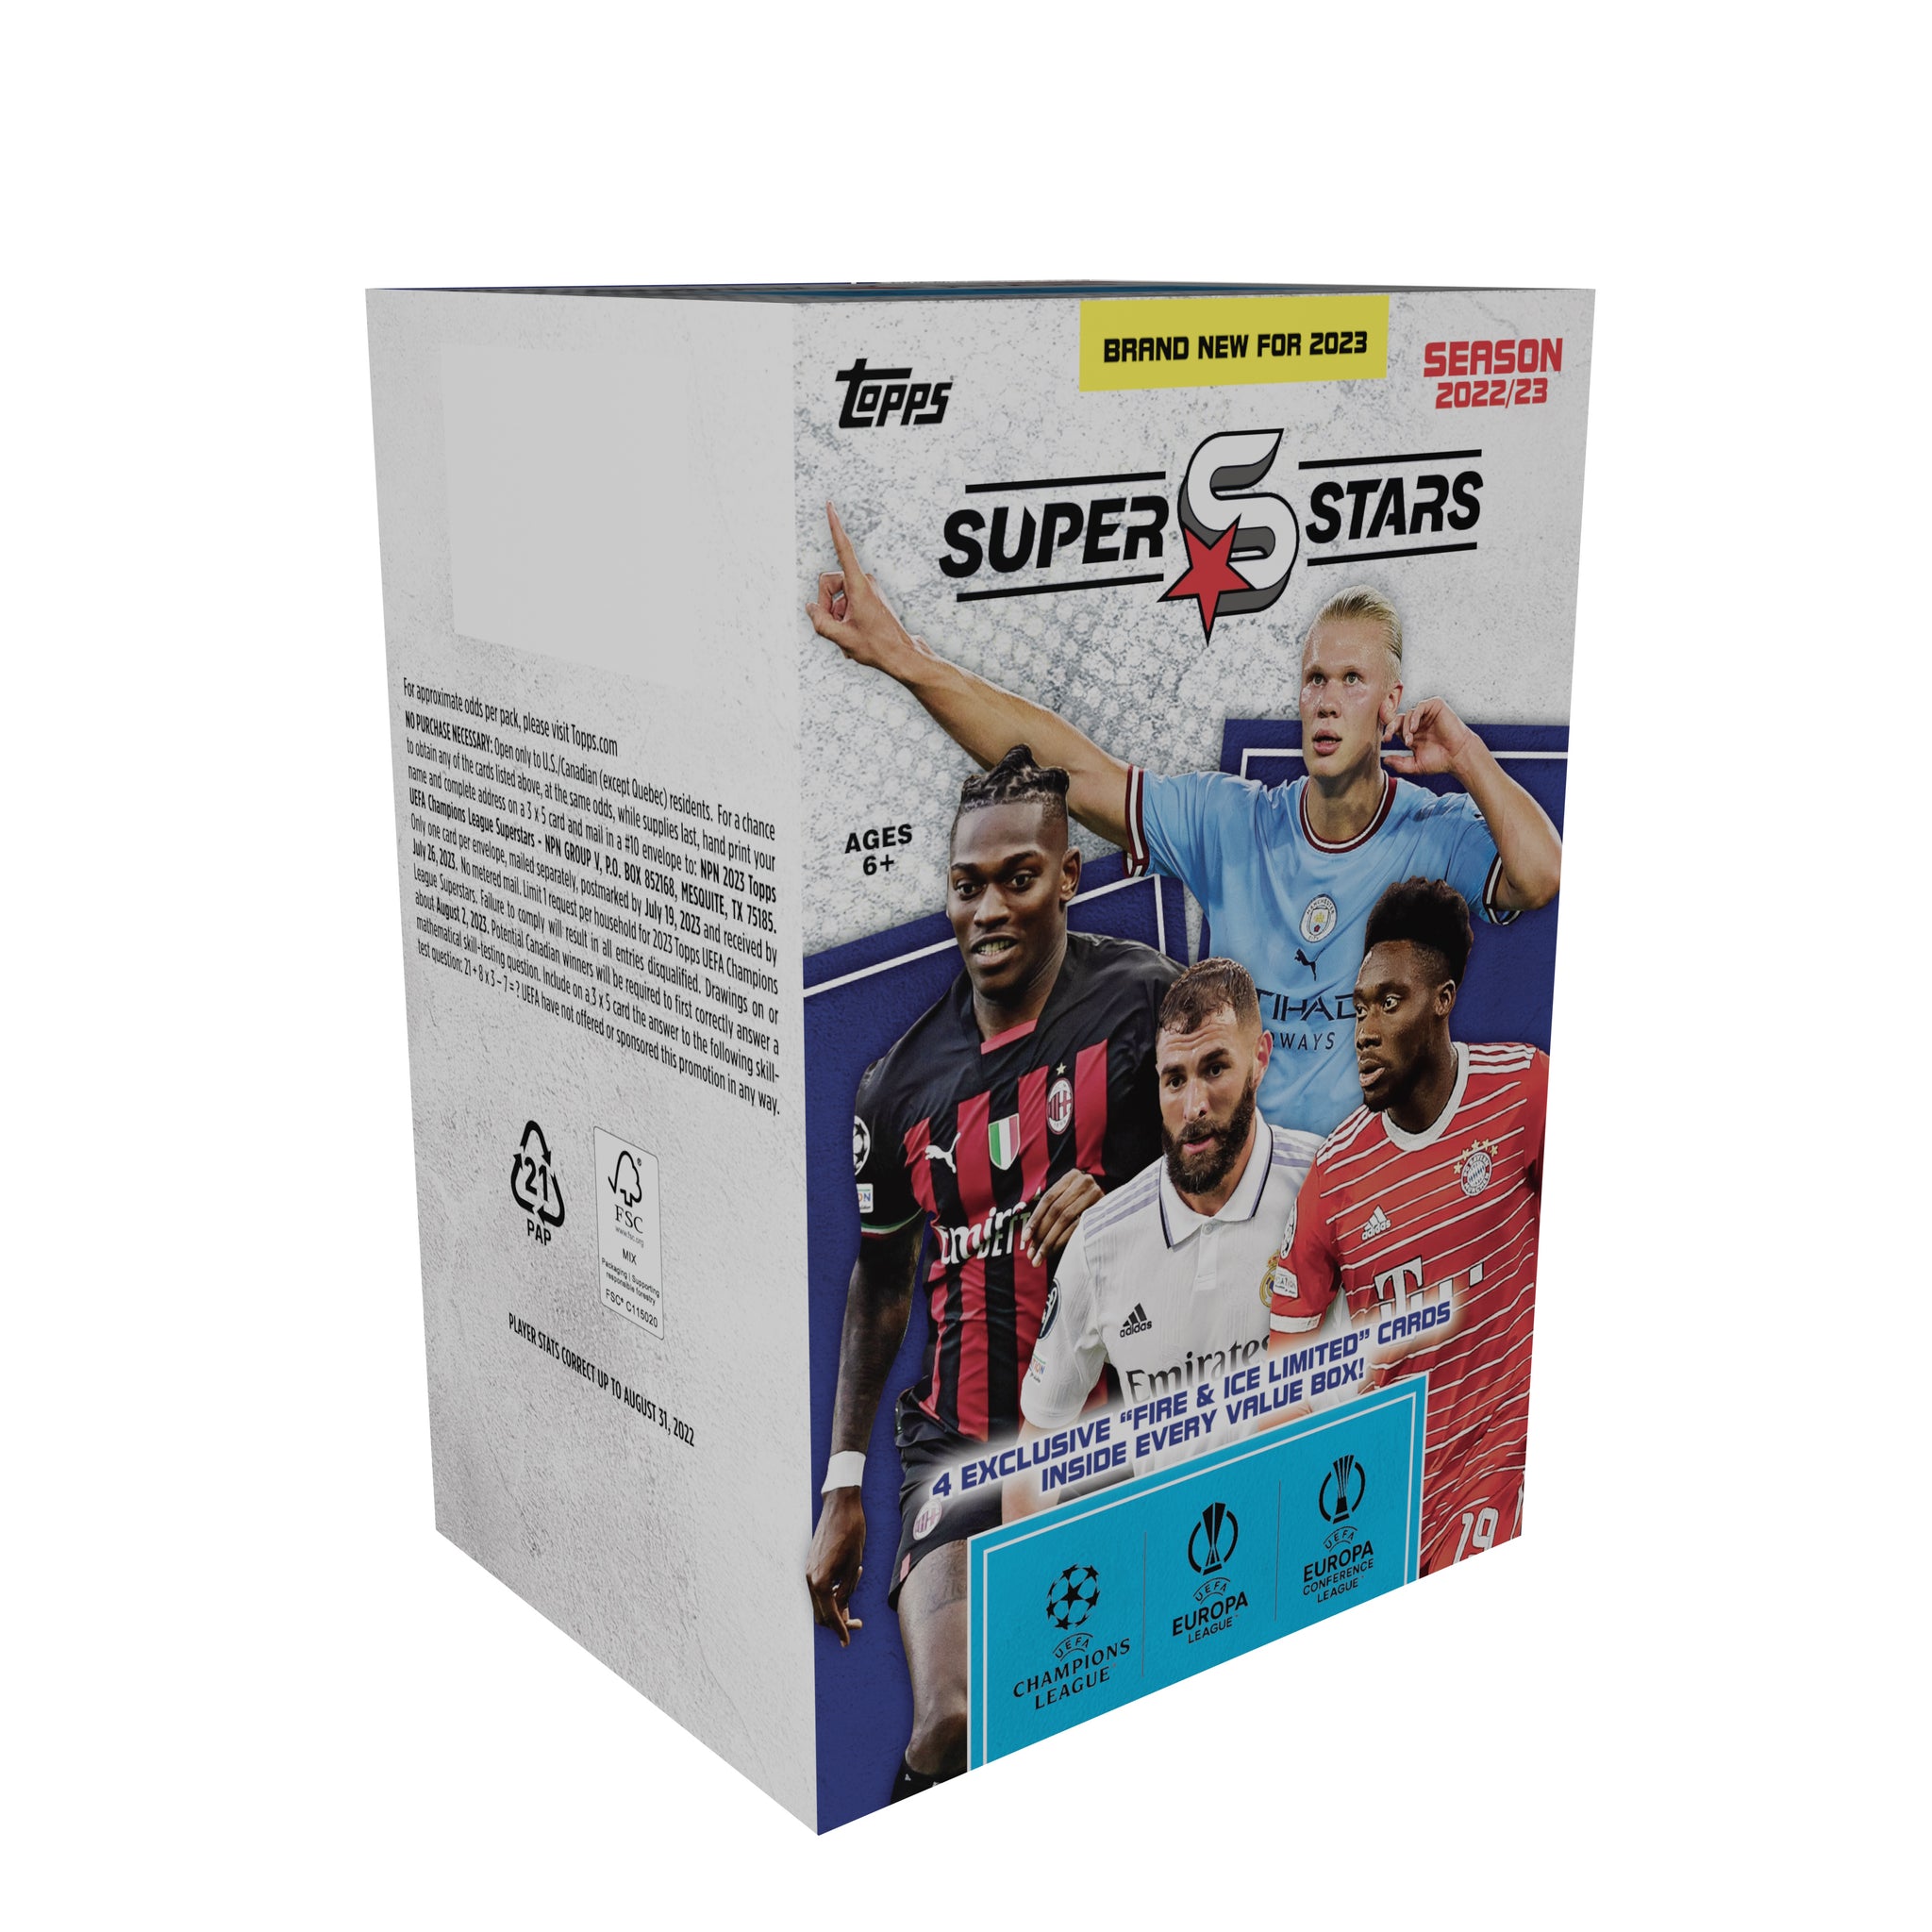 2022-23 TOPPS SUPERSTARS UEFA CHAMPIONS LEAGUE CARDS - 9-PACK BLASTER BOX (72 CARDS + 4 FIRE & ICE PARALLELS)